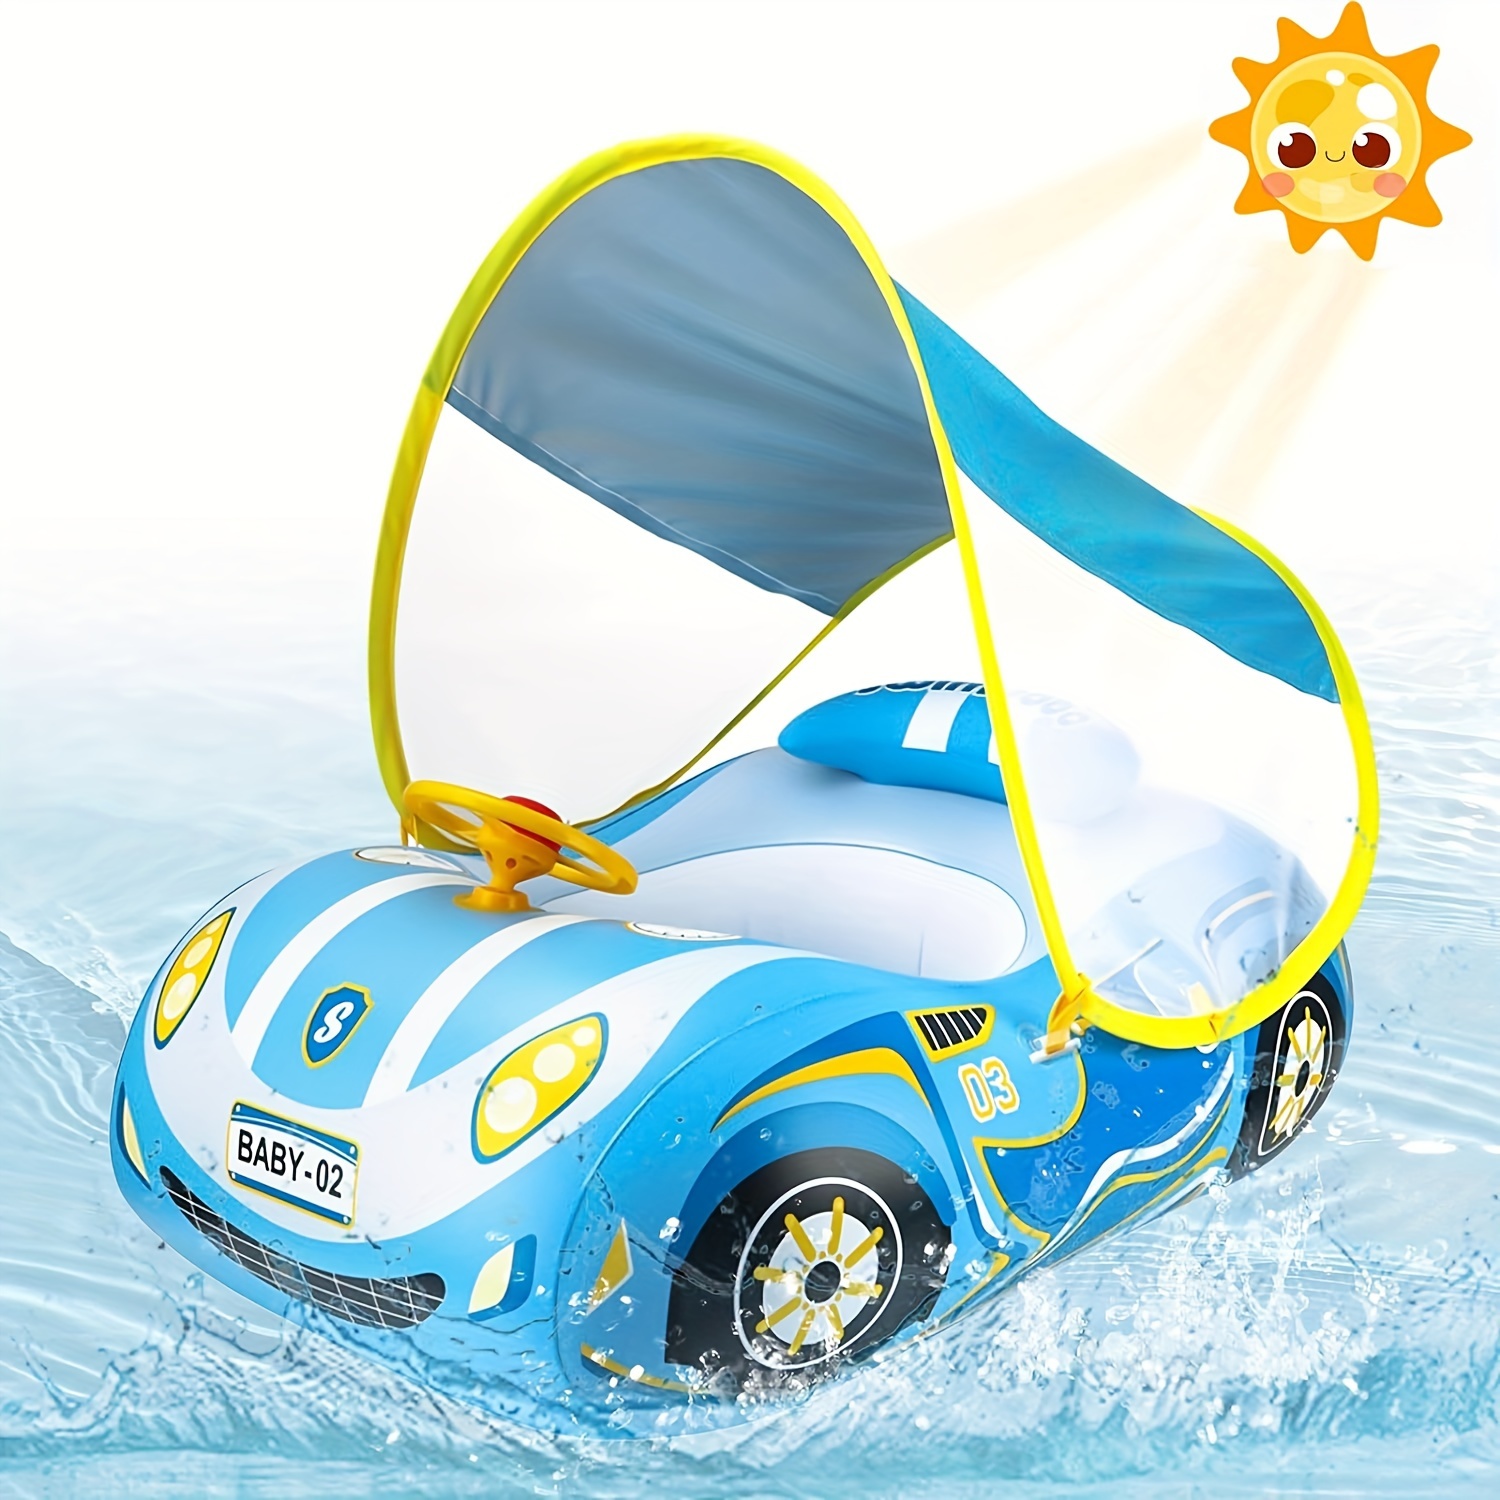 

Baby Pool Float With Canopy Upf50+ Sun Protection & Toy Play Steering Wheel Baby Swimming Float With Patch Kit For Babies Aged 3-36 Months Swim Float (blue)